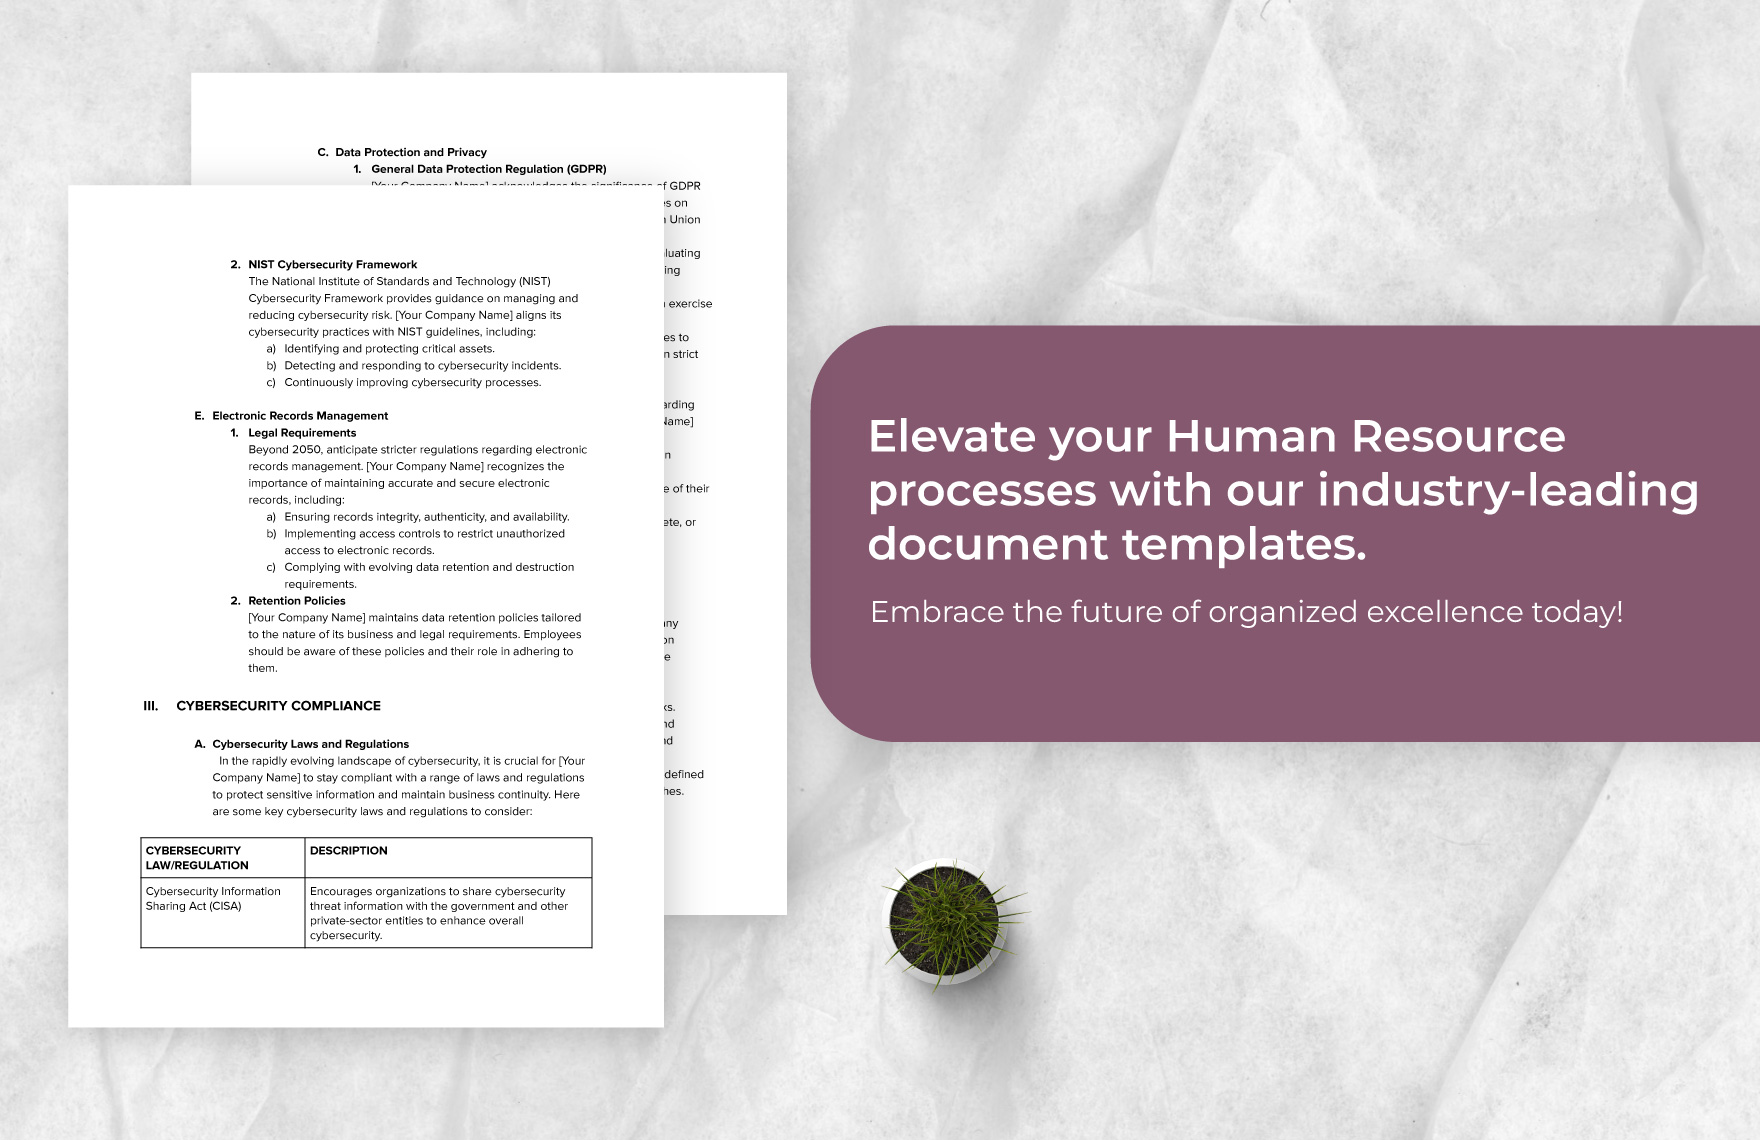 IT, Cybersecurity, and HR: Legal Compliance Manual Template